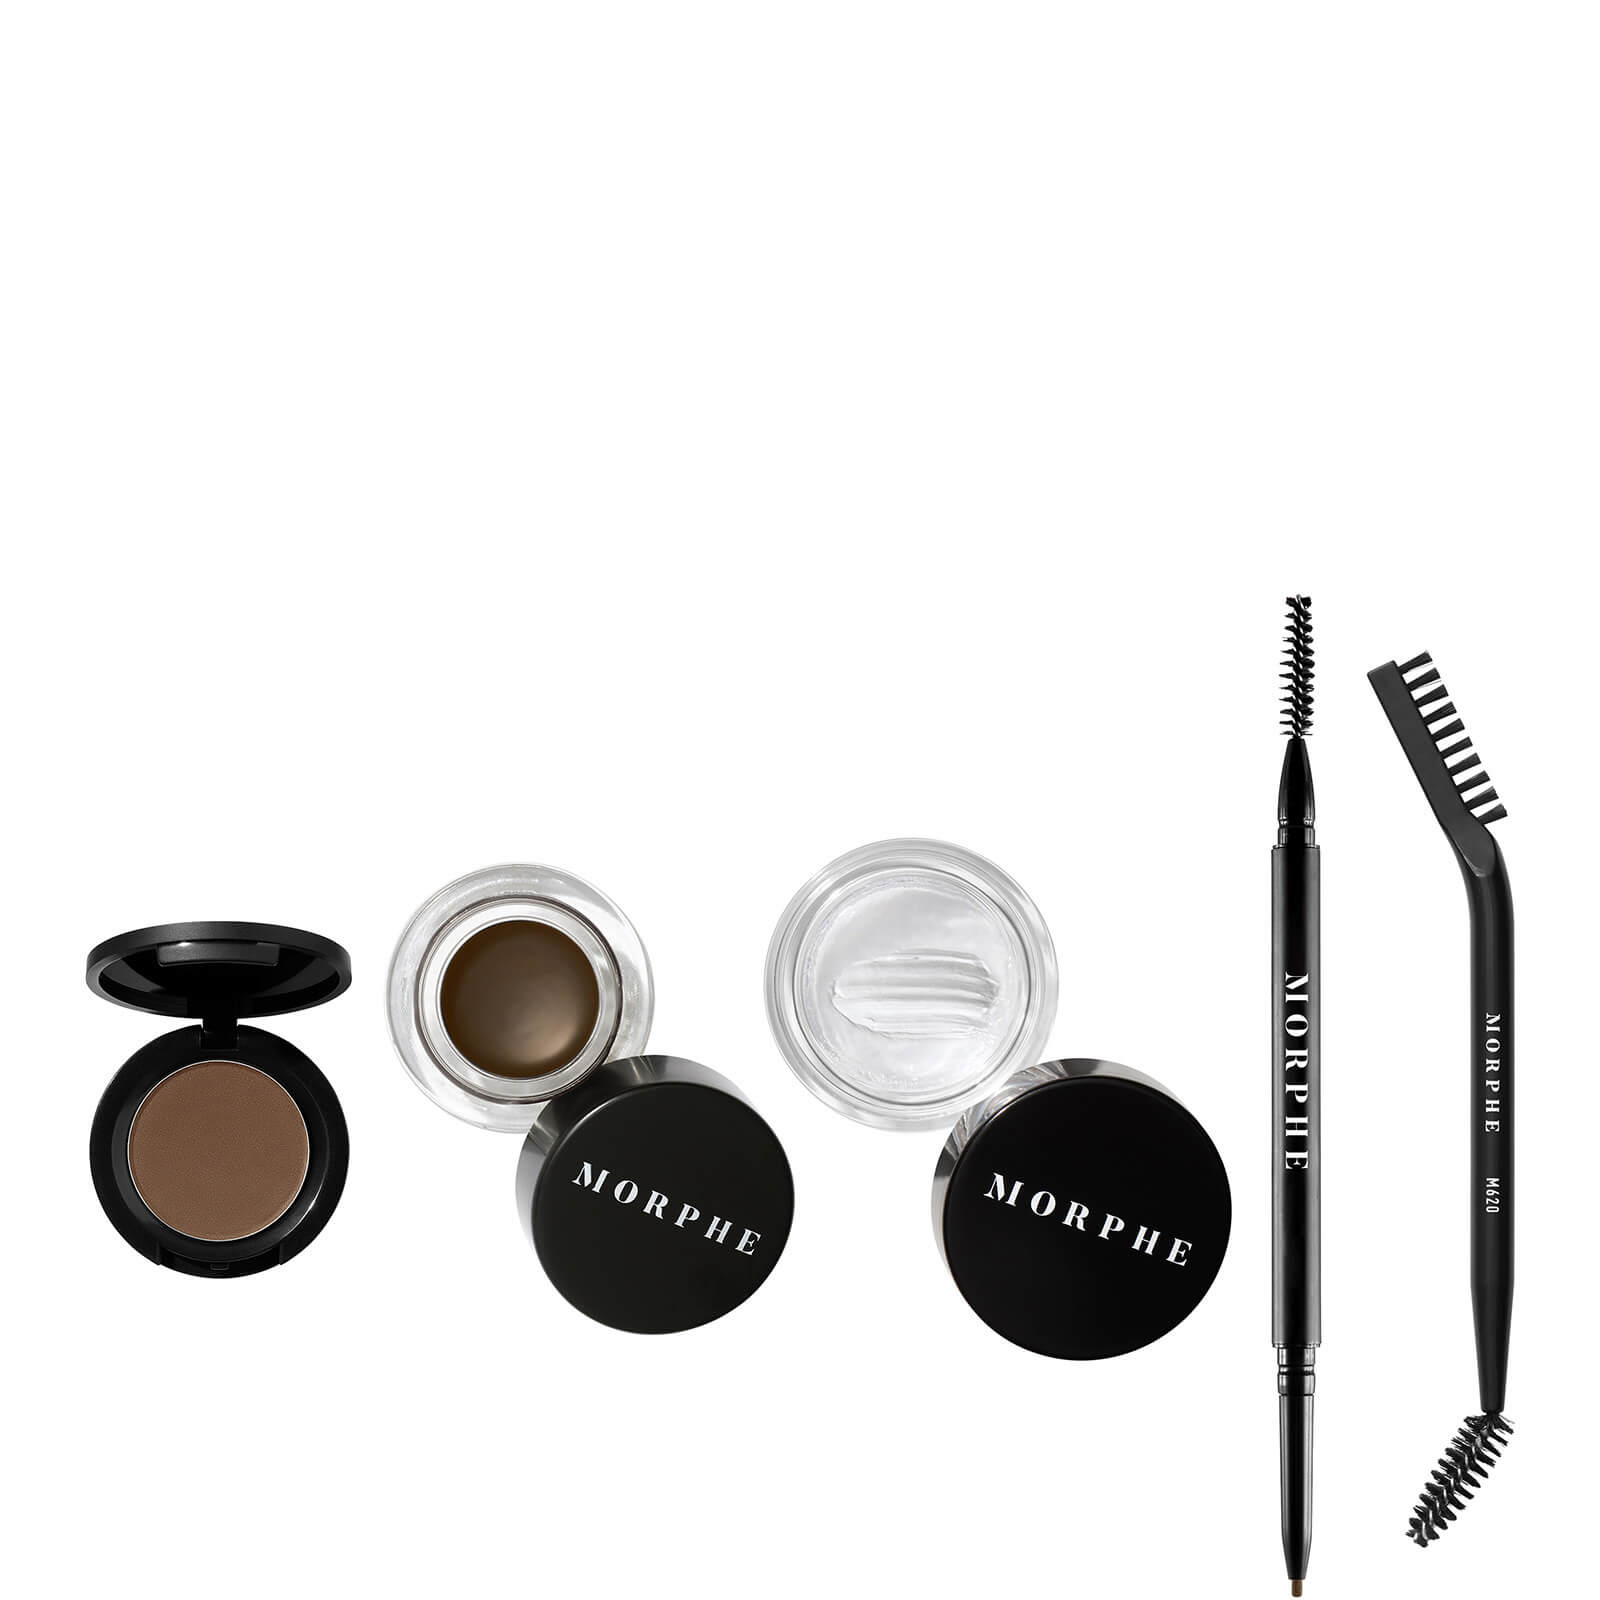 Morphe Supreme Brow 5-Piece Artist's Brow Kit (Various Shades) - Cold Brew